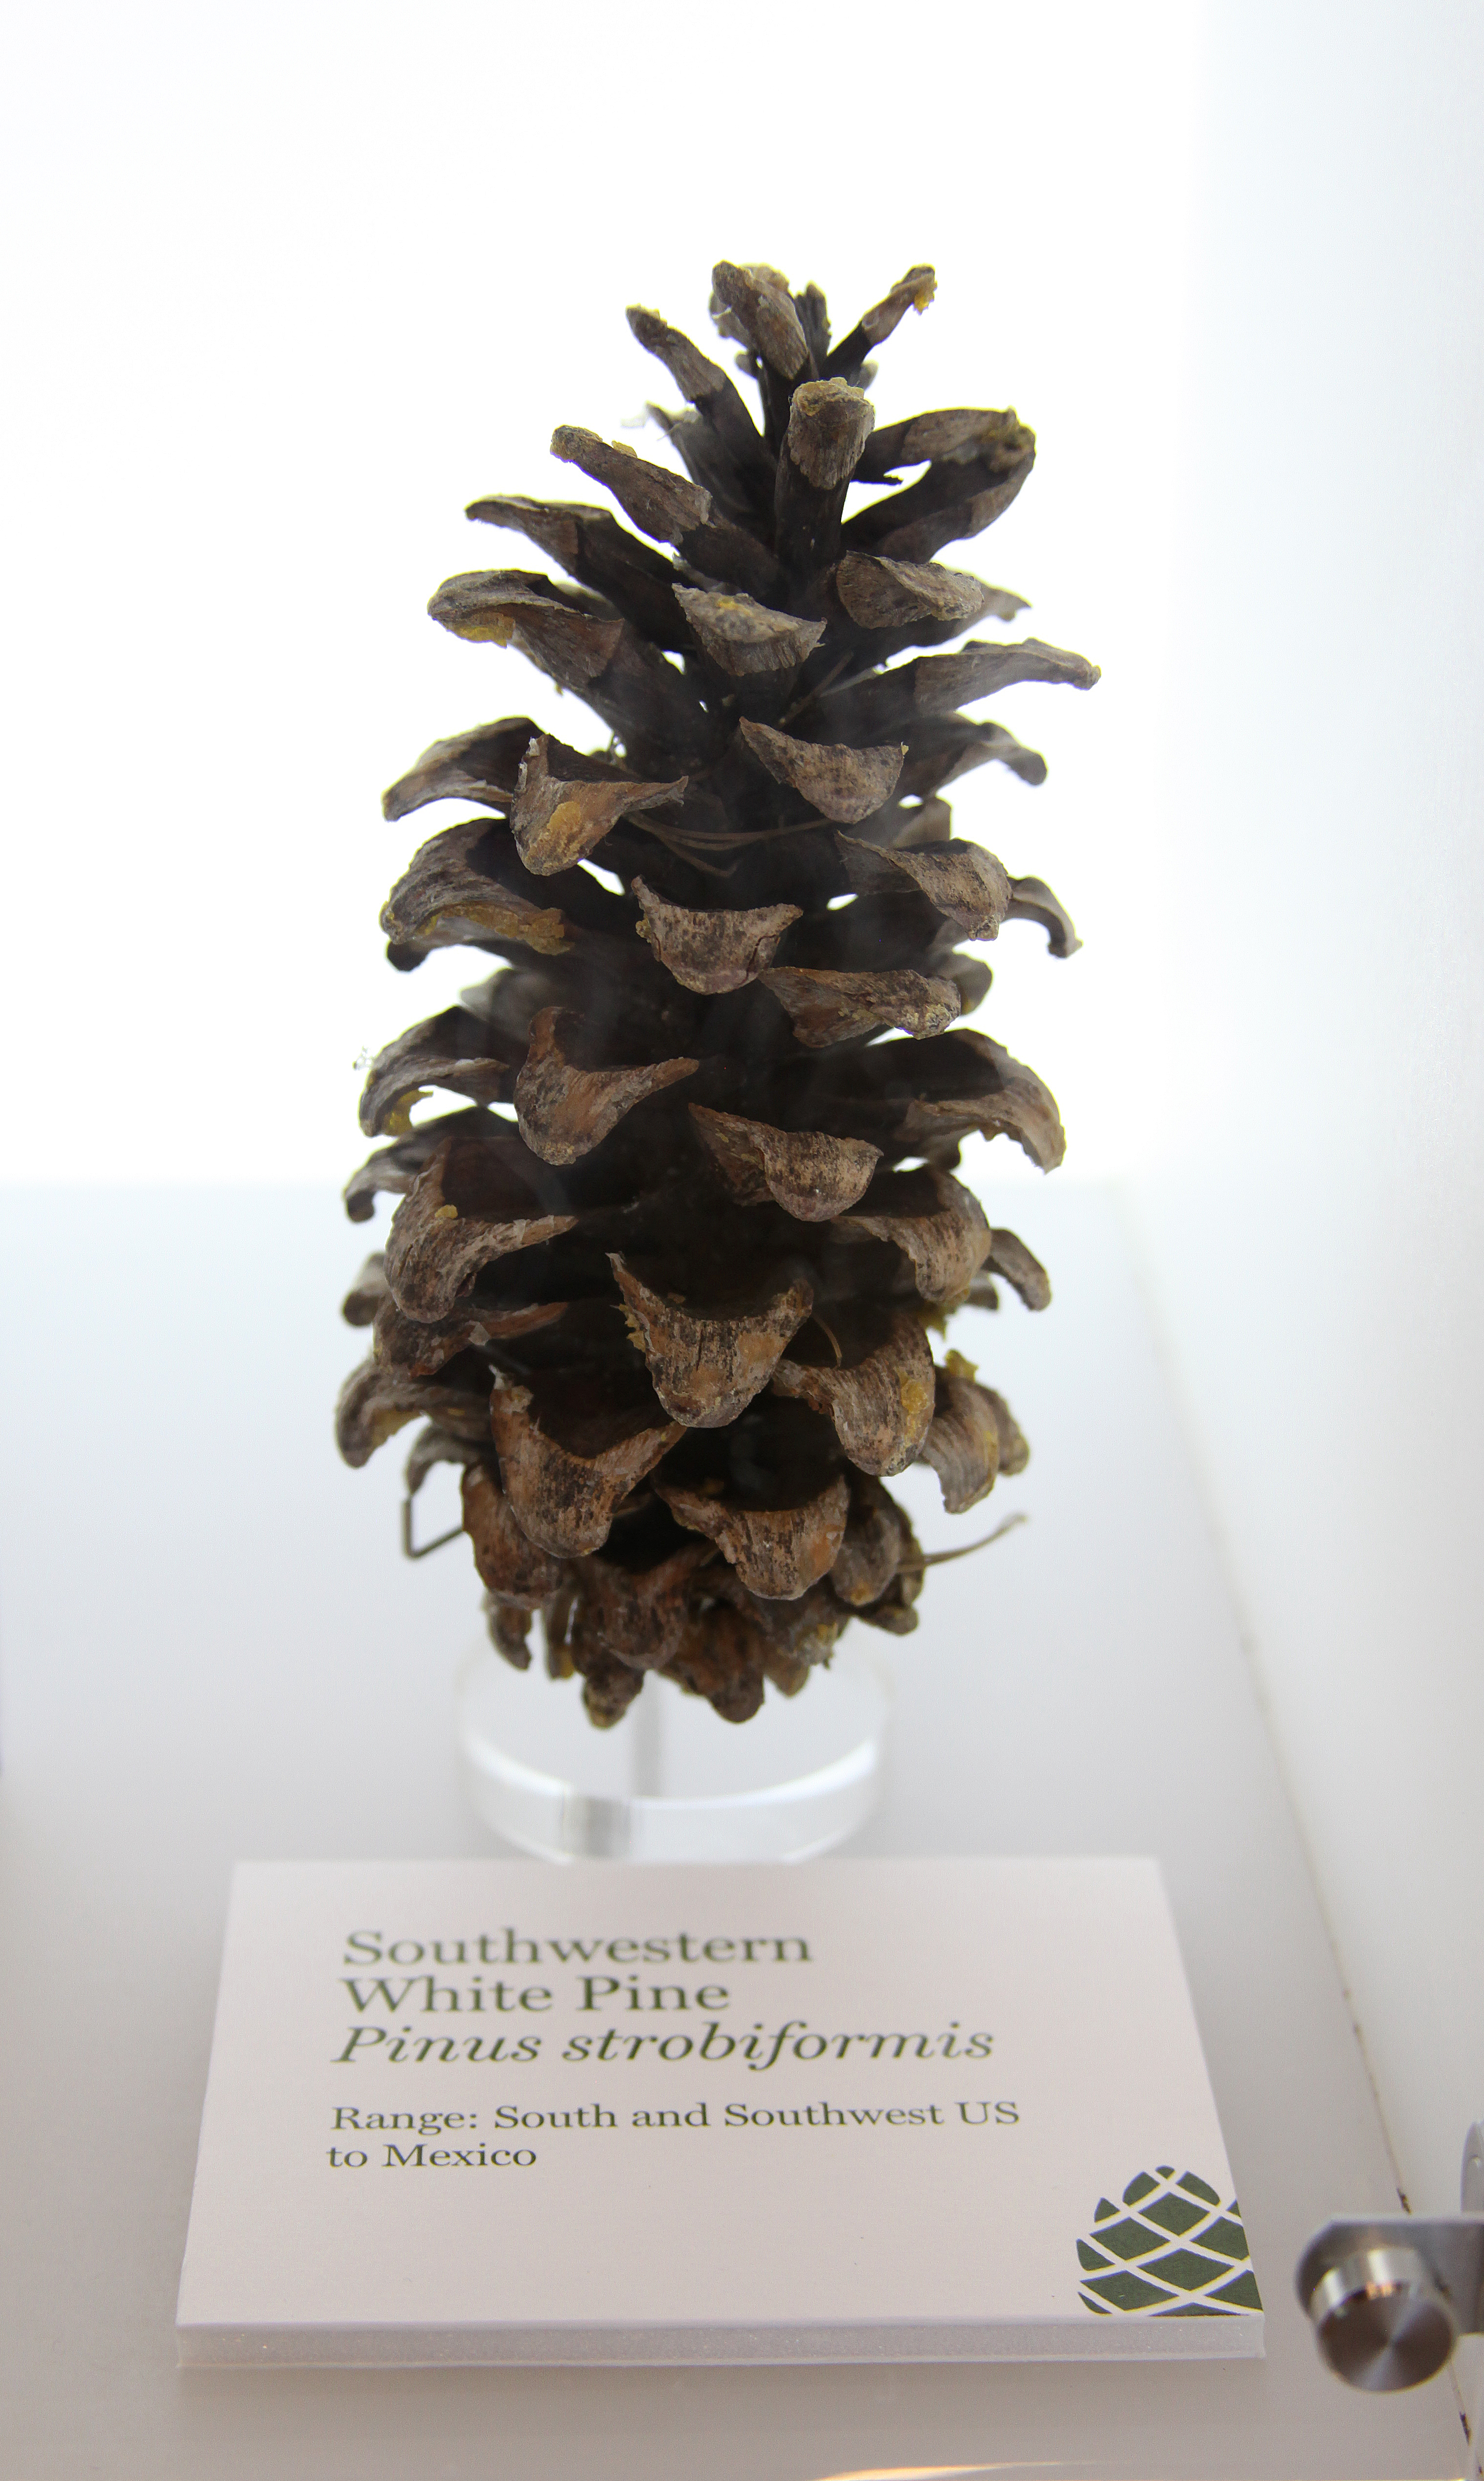 Pine Cone Botany For Beginners - Dyck Arboretum